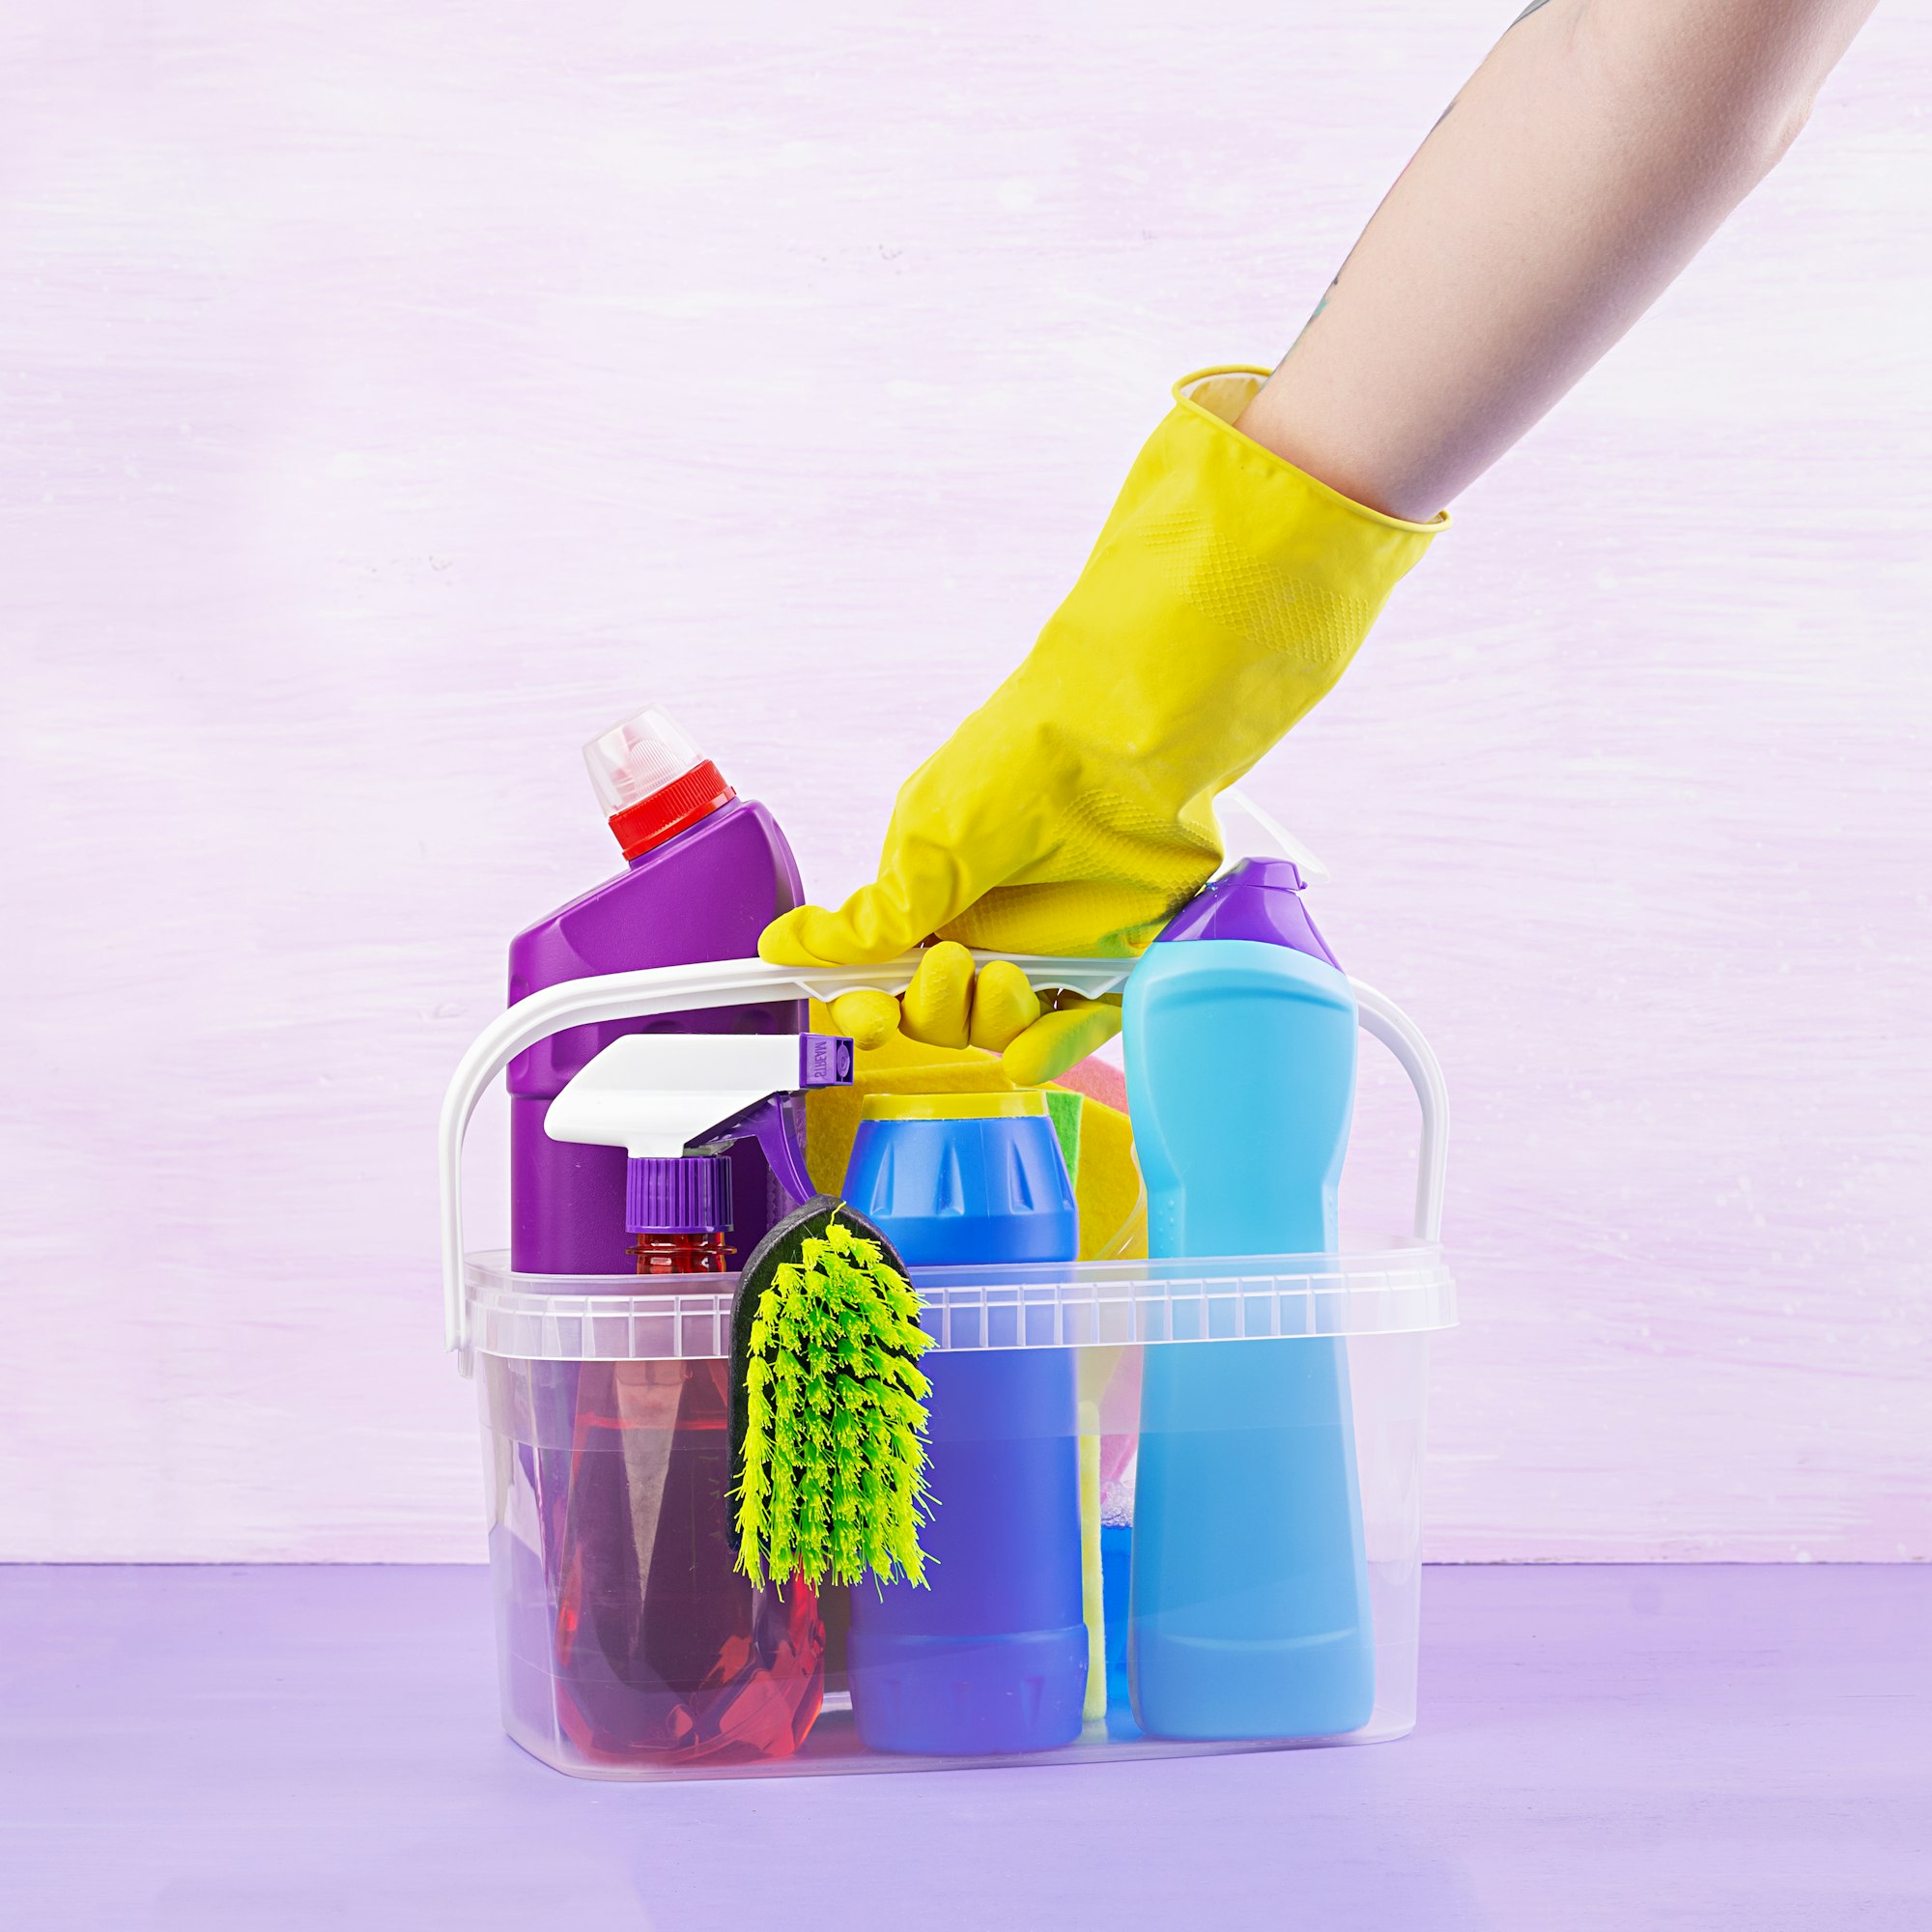 Cleaning service concept. Colorful cleaning set for different surfaces